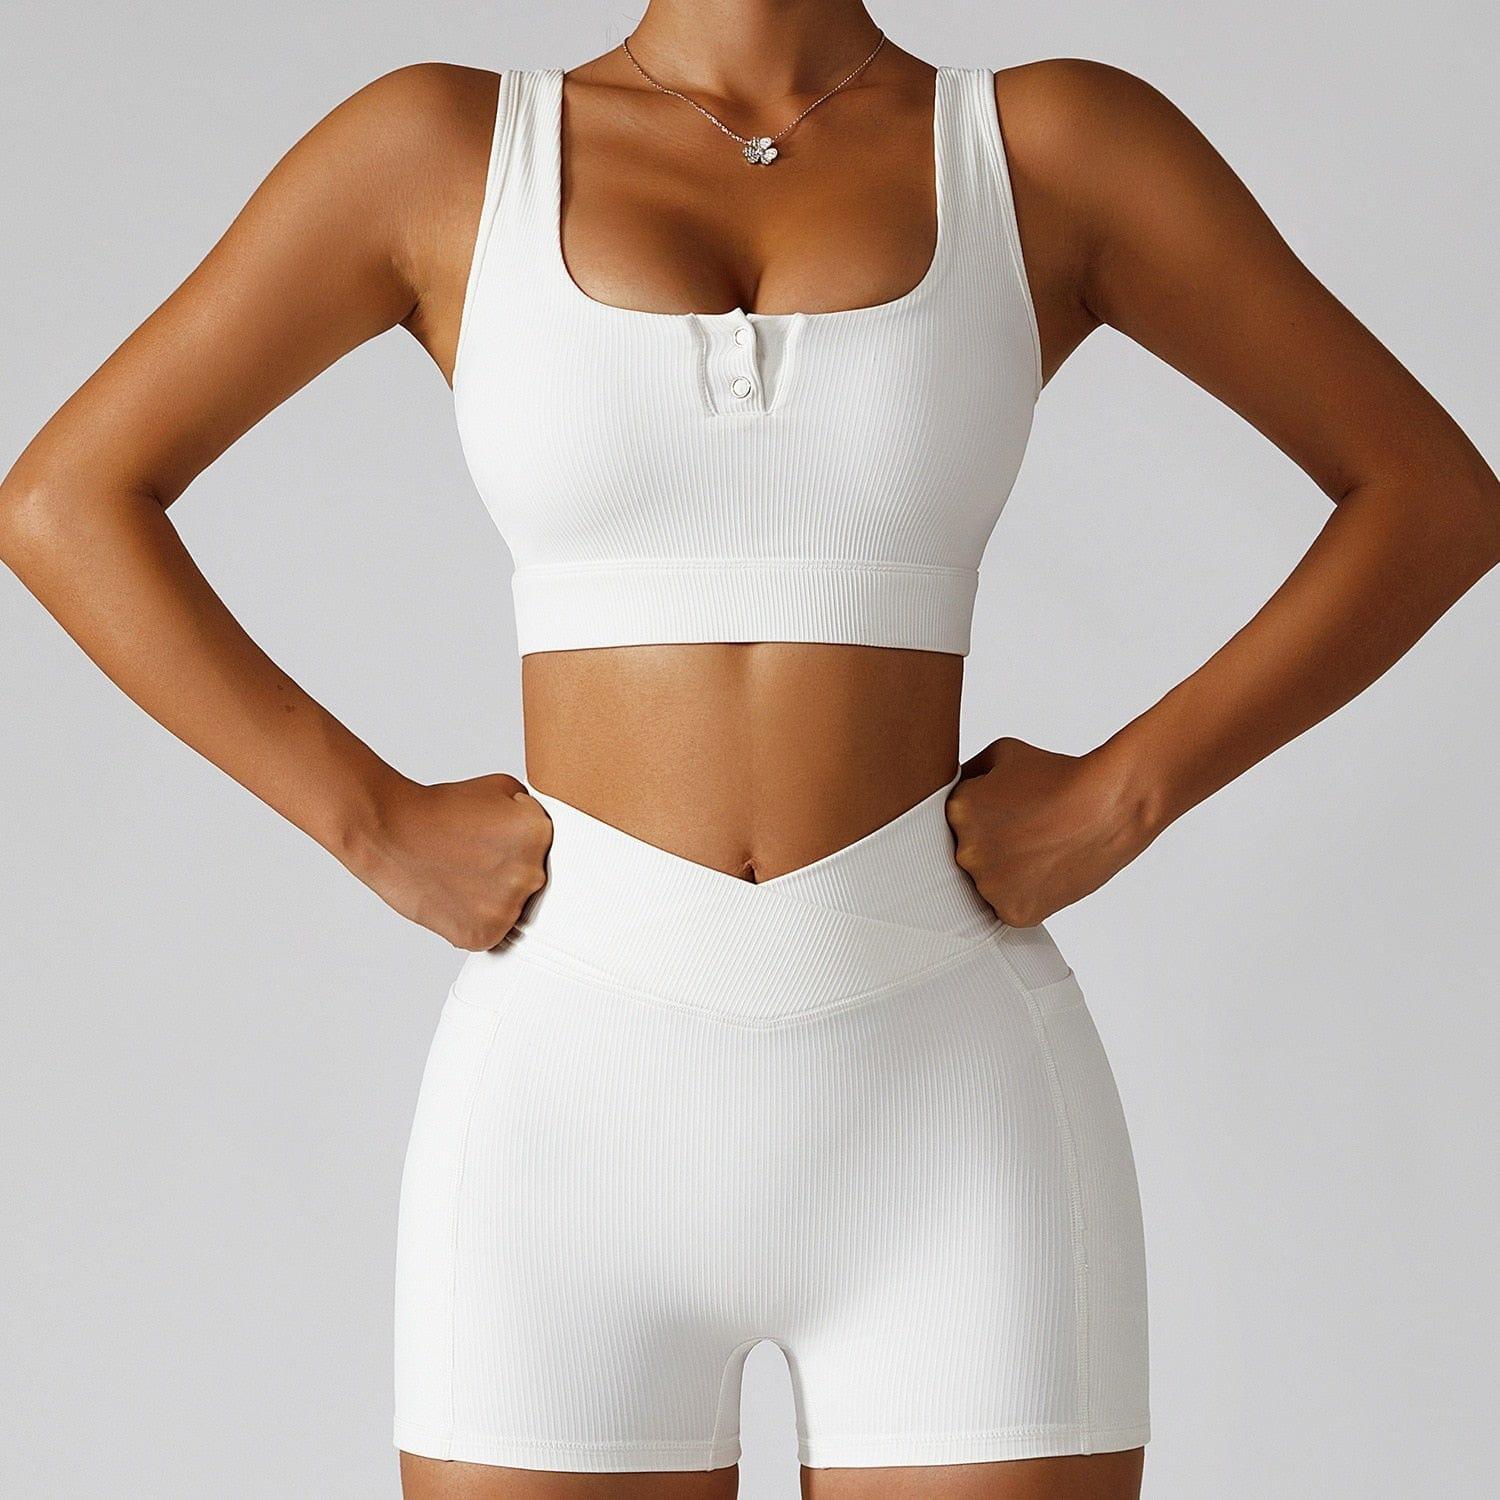 Shop 0 White suit-1 / S / China 2 Pieces Seamless Women Tracksuit  Yoga Set Running Workout Sportswear Gym Clothes Fitness Bra High Waist Leggings Sports Suit Mademoiselle Home Decor